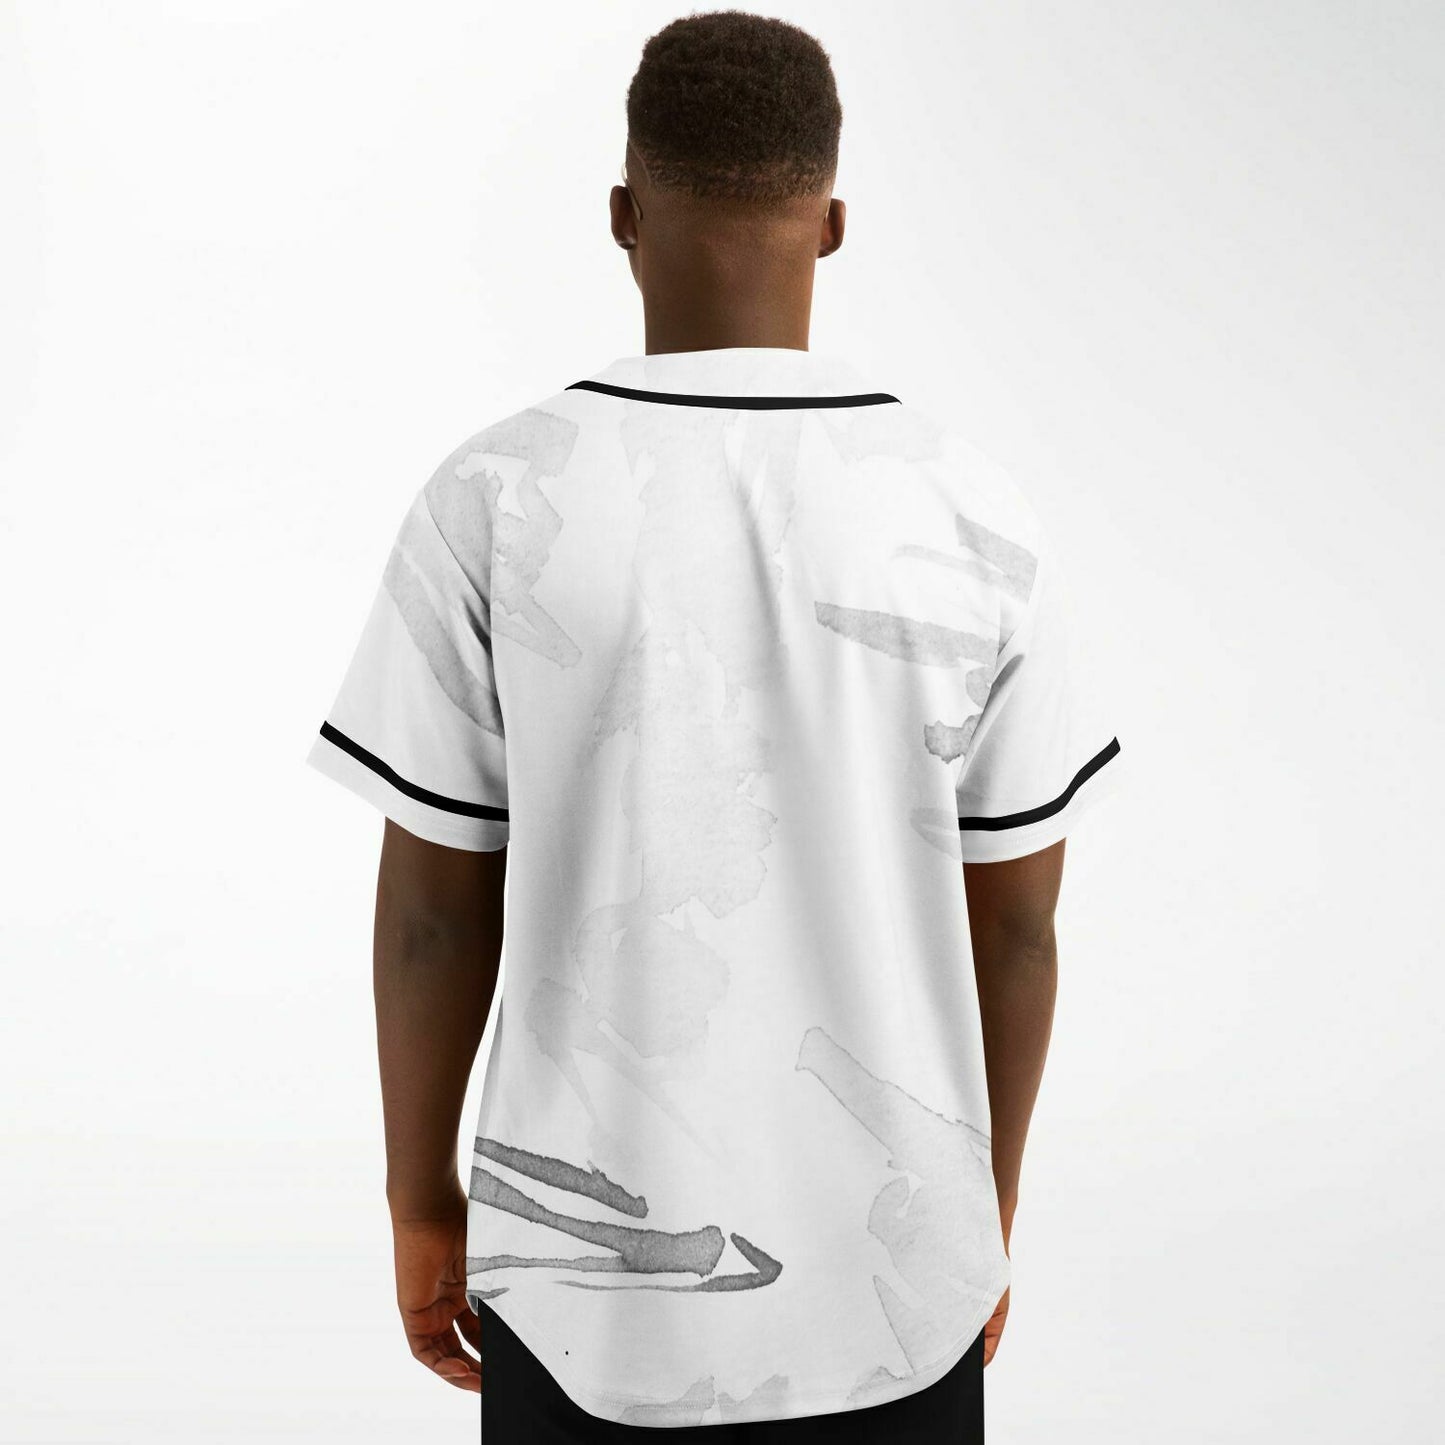 Adult All Over Print Baseball Jersey